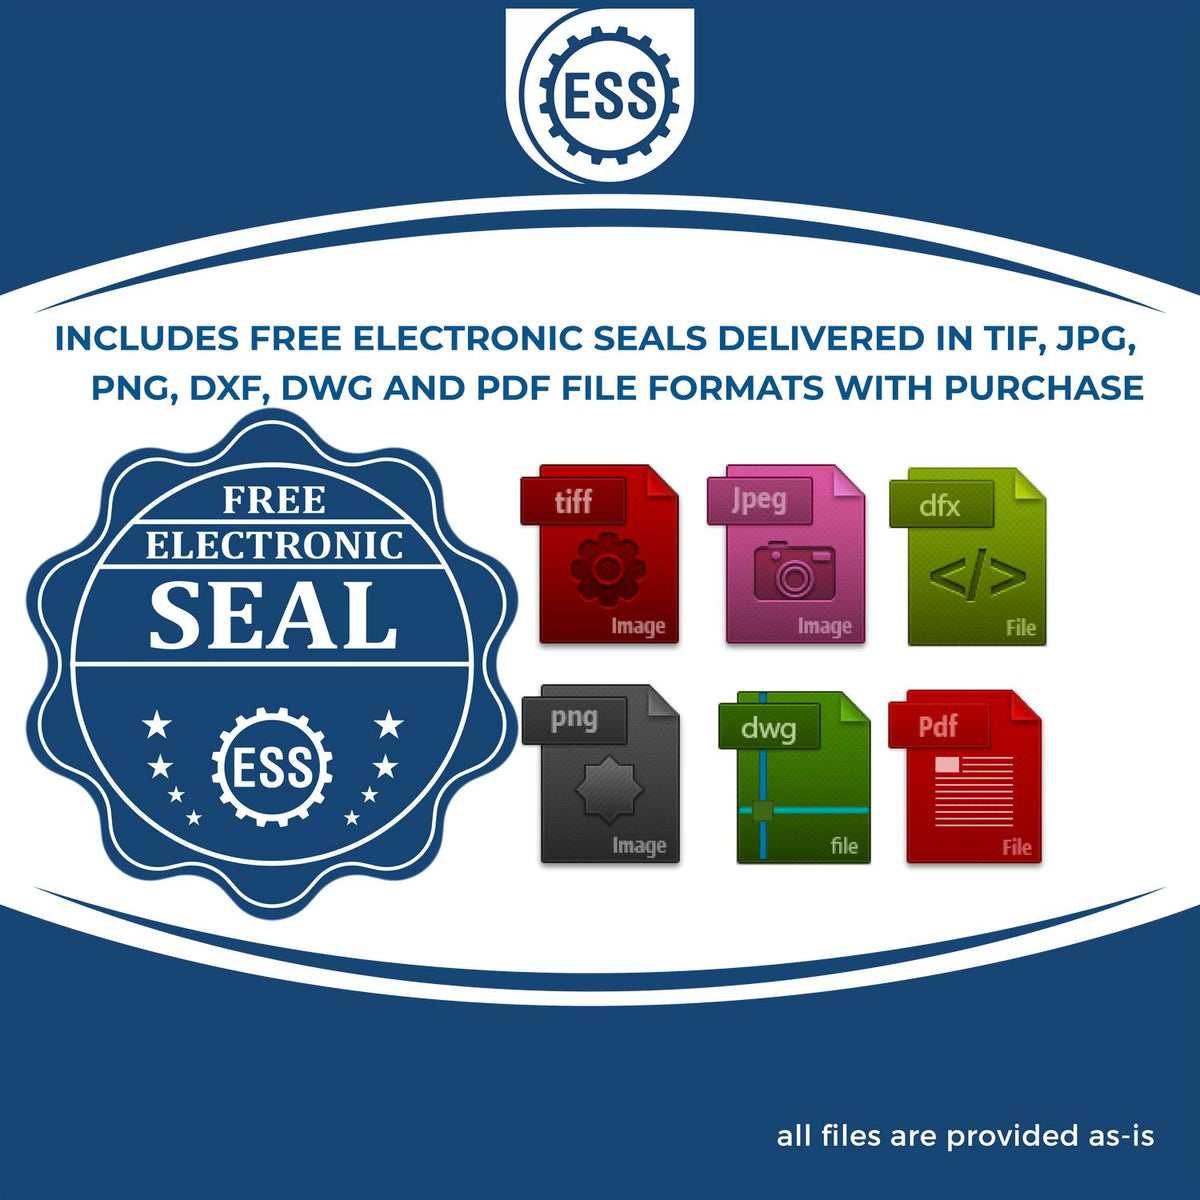 An infographic for the free electronic seal for the Minnesota Engineer Desk Seal illustrating the different file type icons such as DXF, DWG, TIF, JPG and PNG.